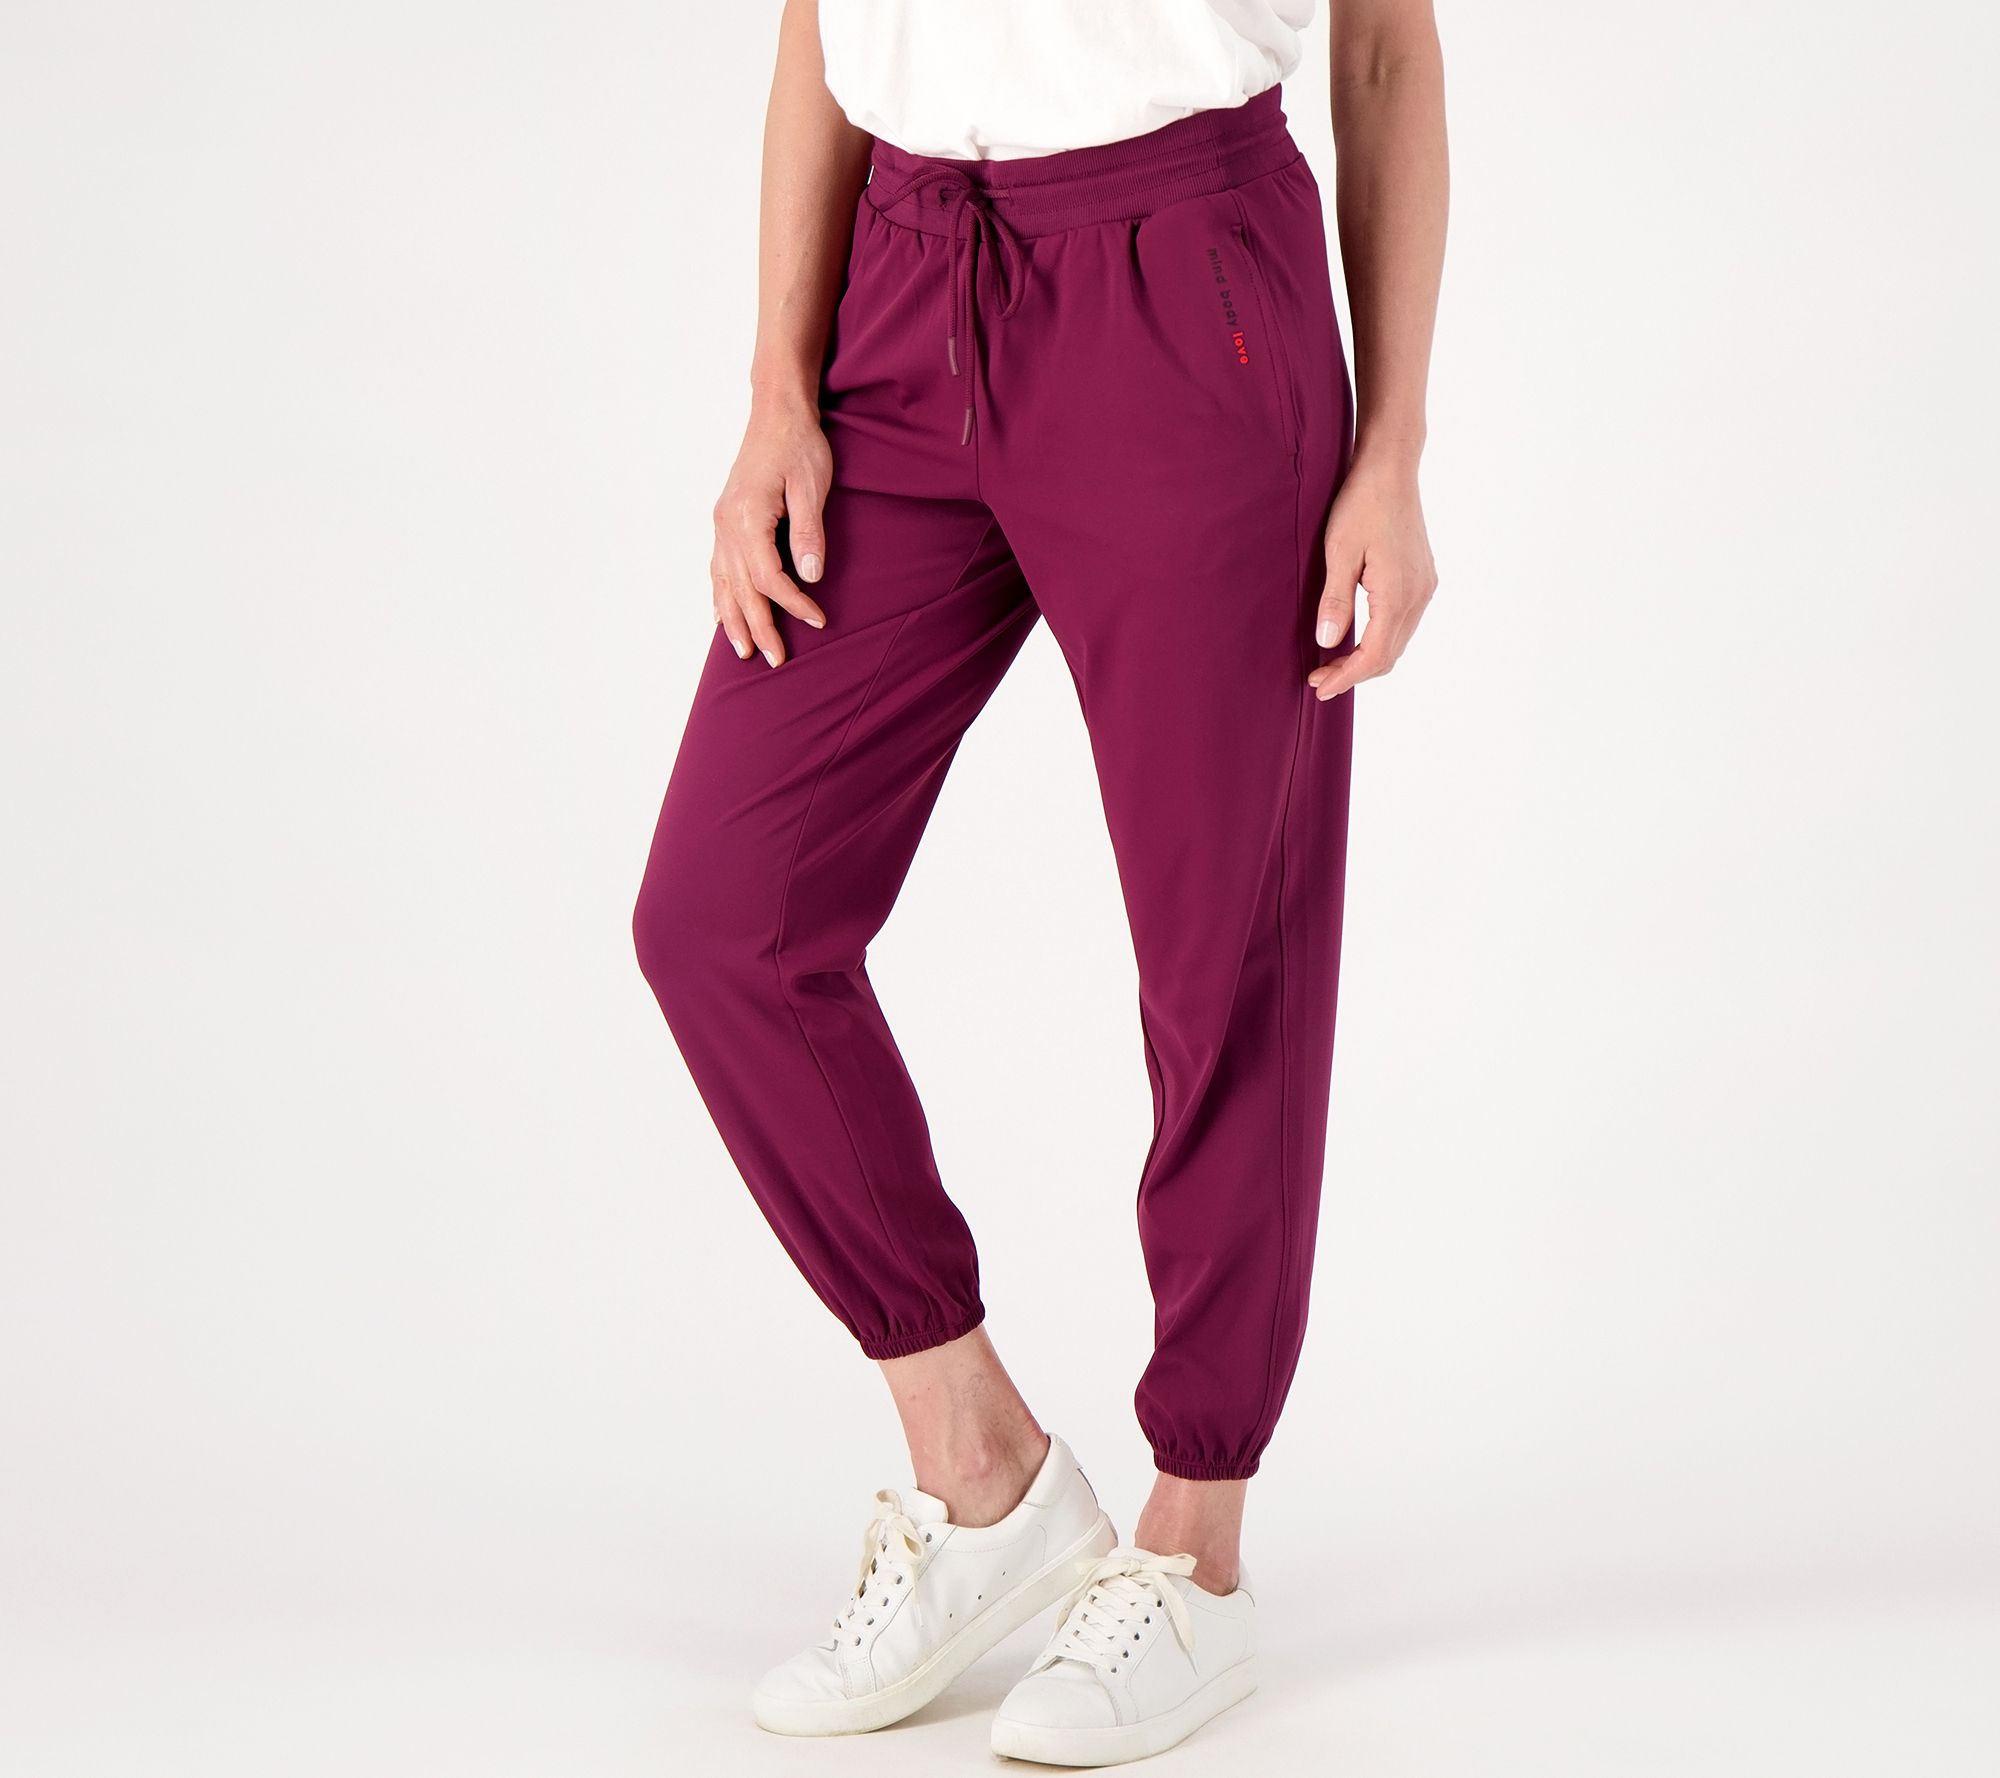 Stay cozy and stylish with these NWT Lululemon joggers